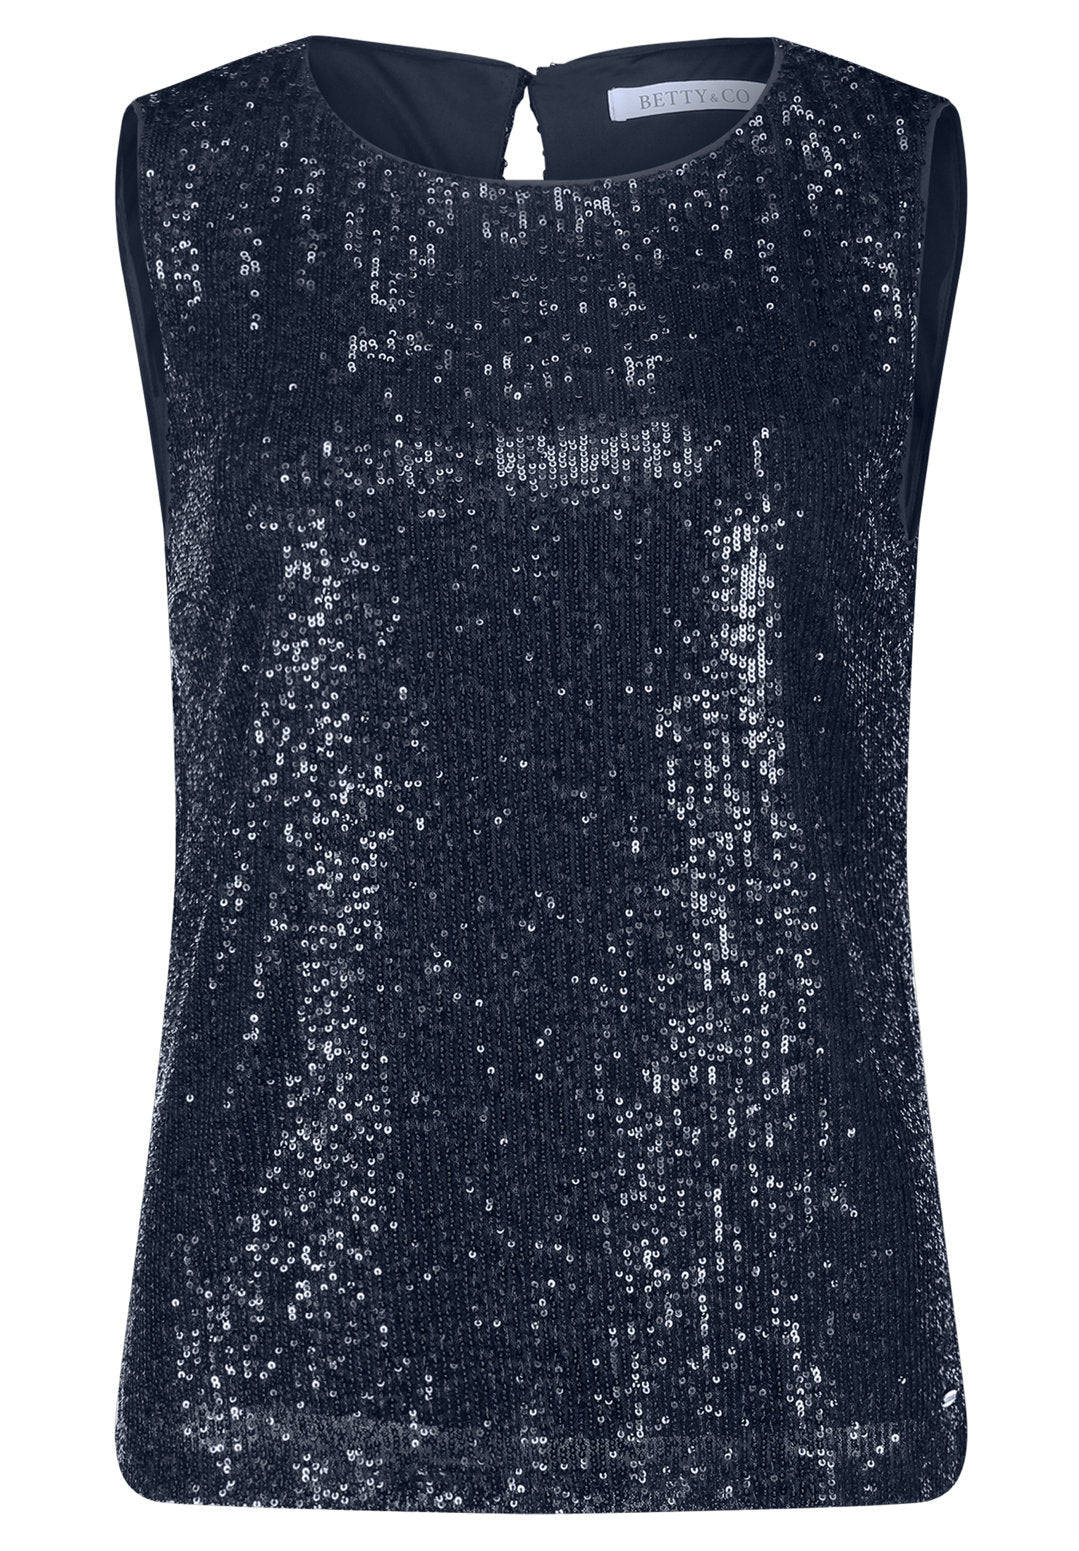 Black Sleeveless Blouse With Sequins_8718 3388_8543_01